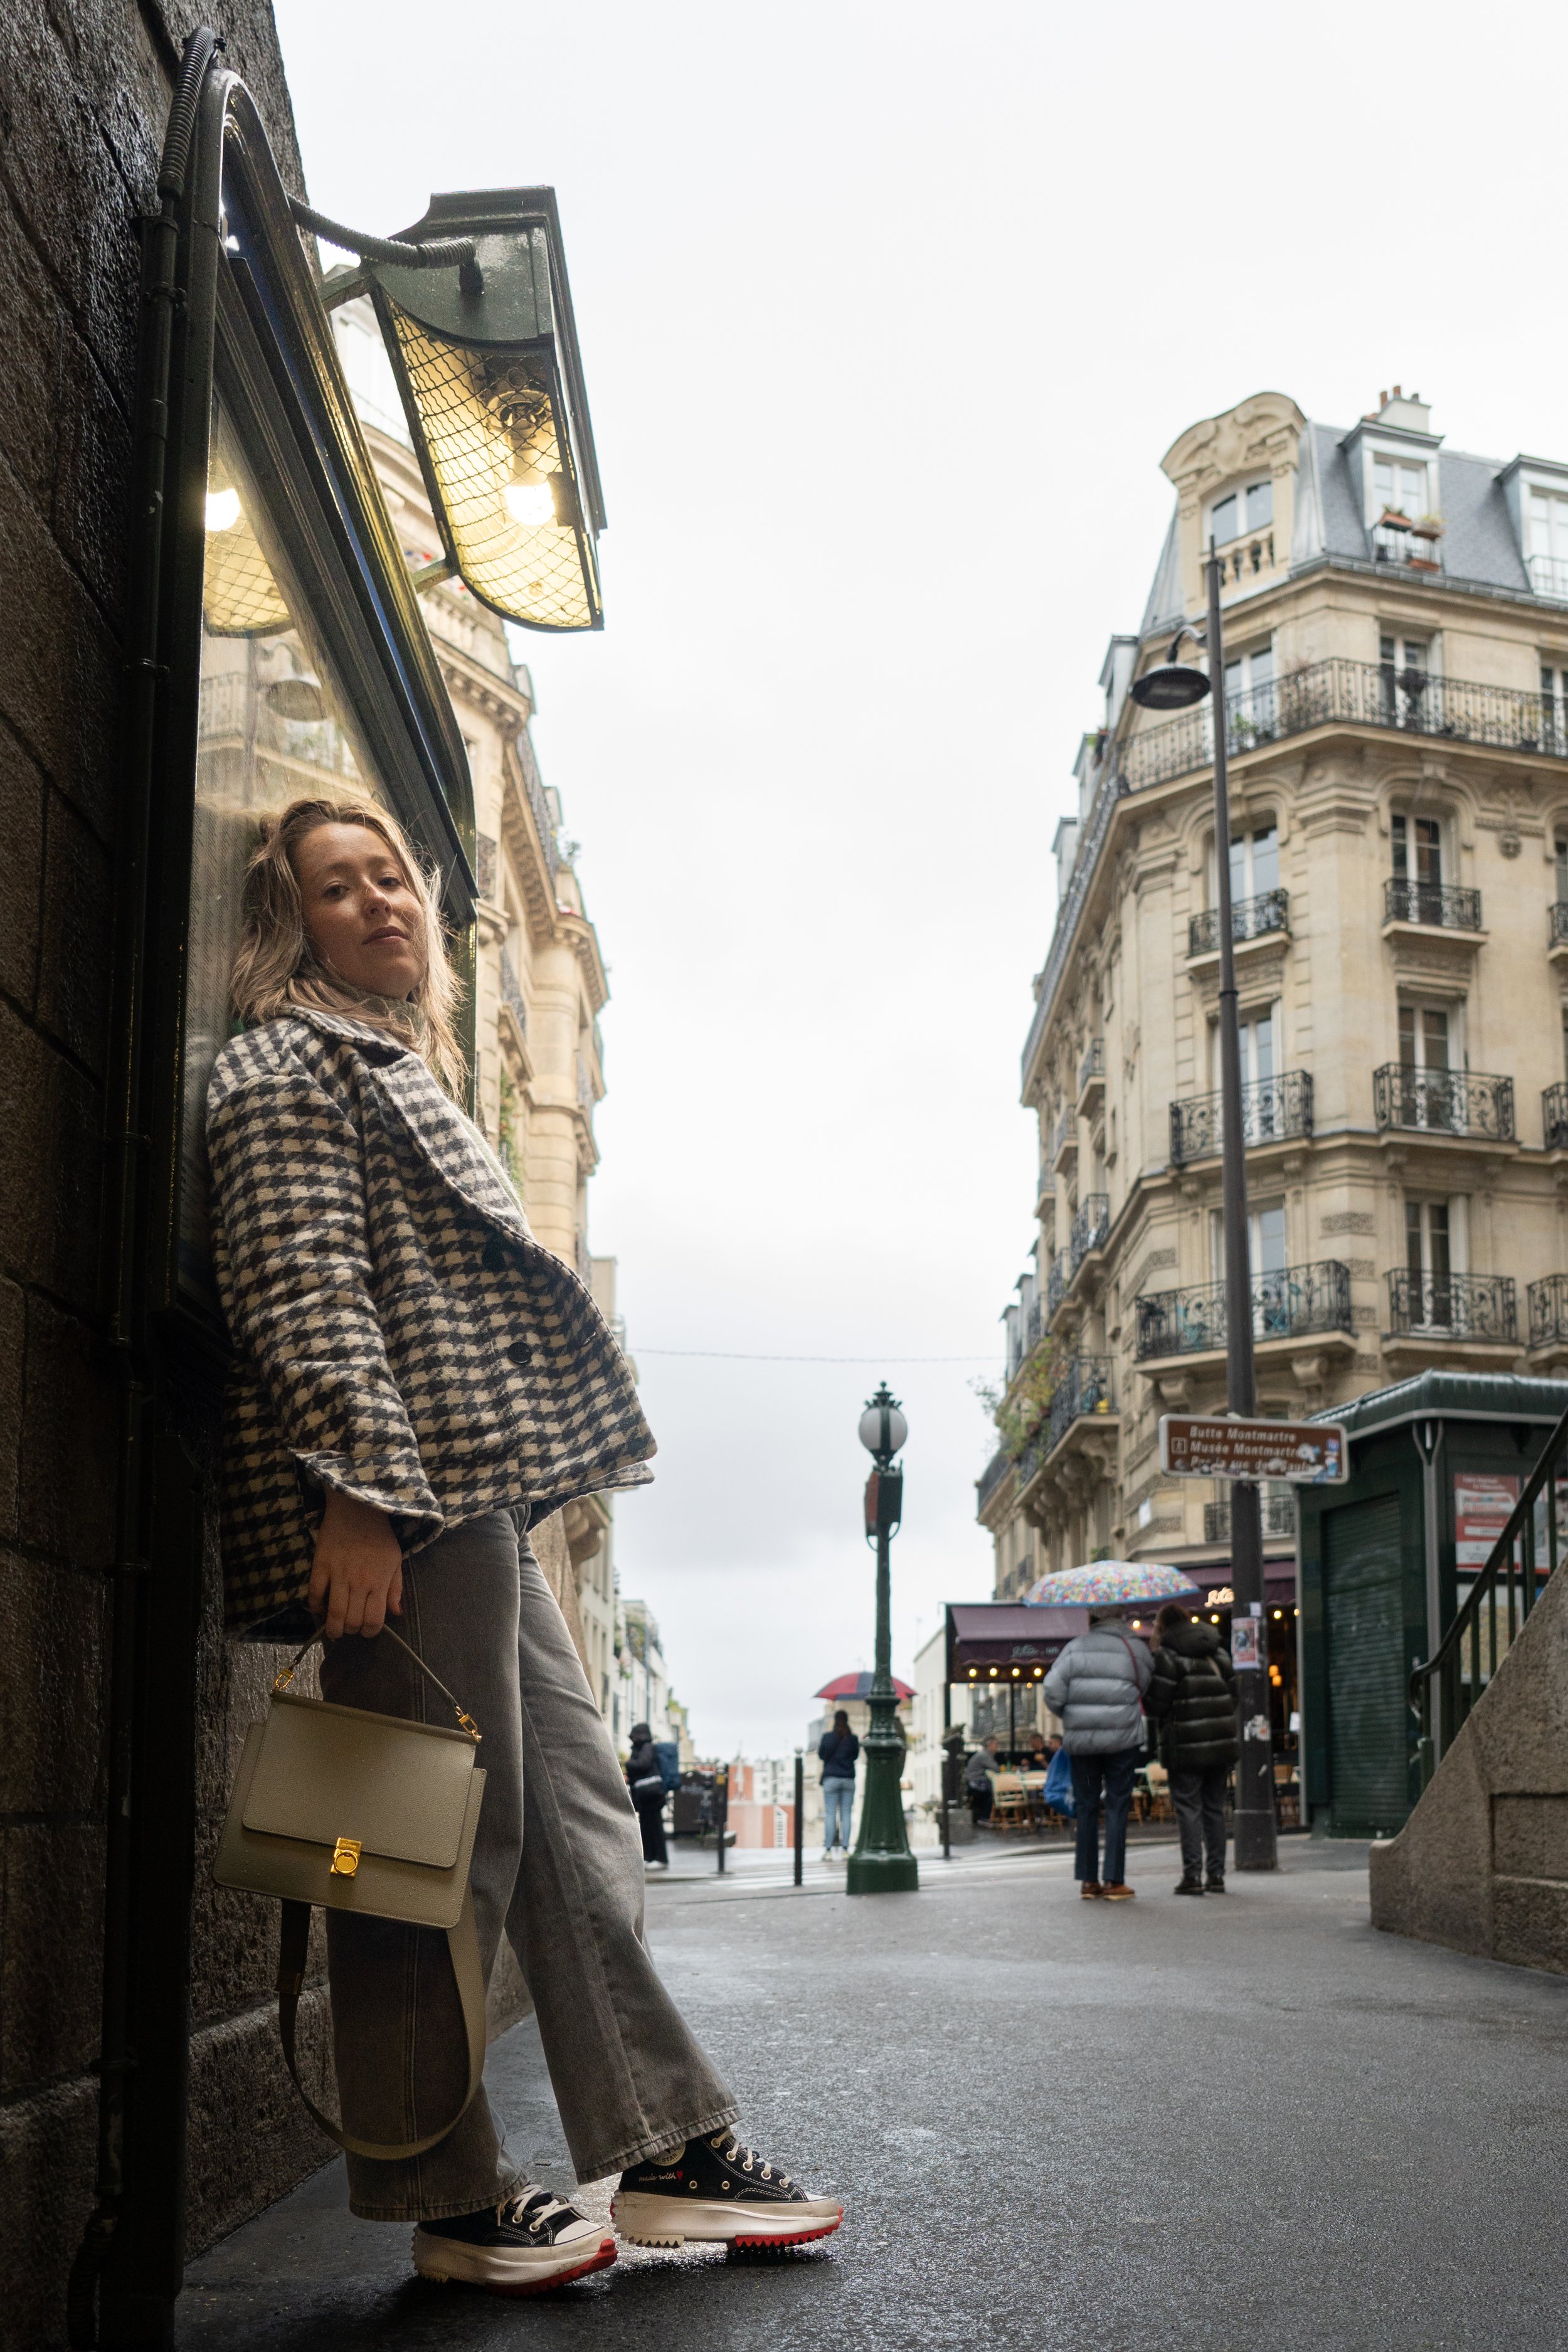  A woman posing during a photo shoot in Paris, France in the Montmartre district.  